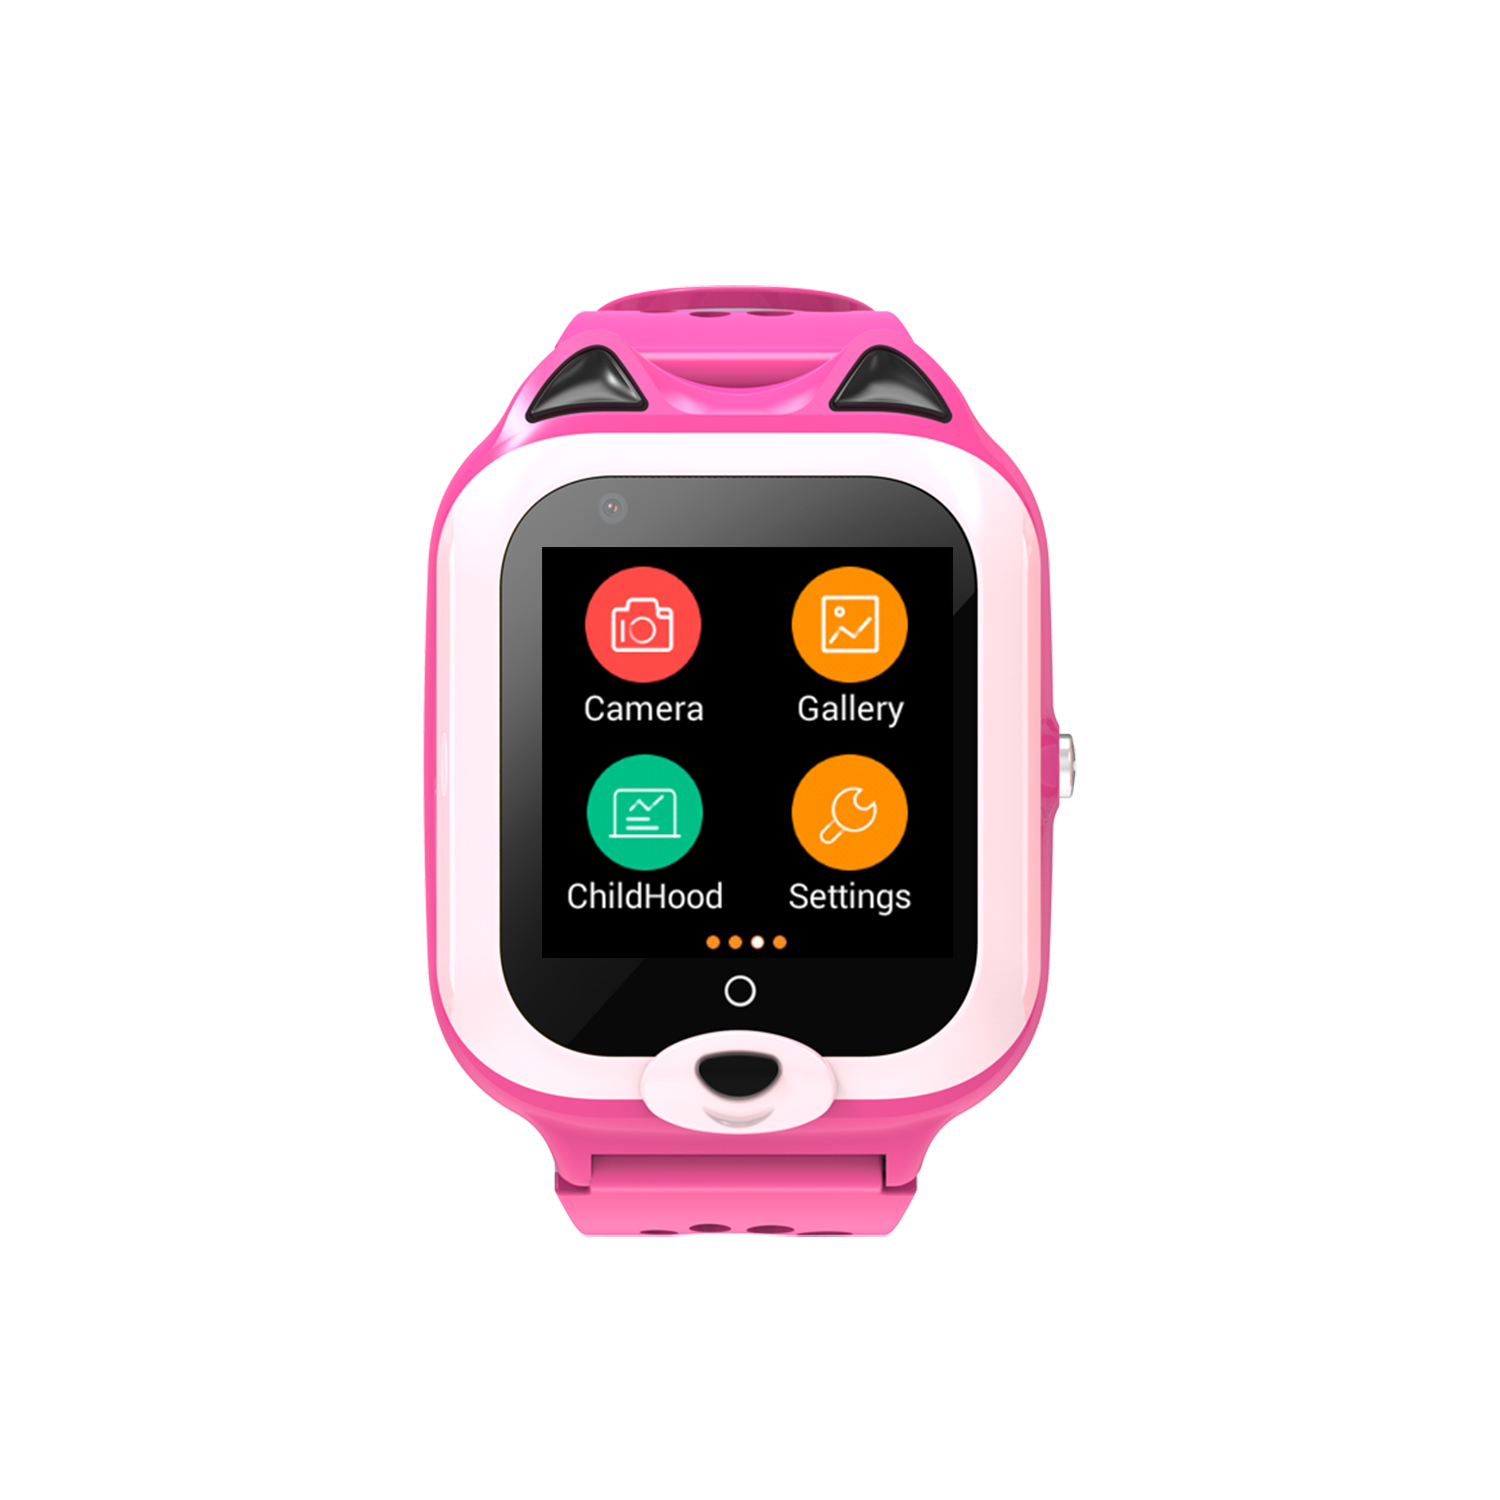 China Factory Newest 4G IP67 Waterproof Students GPS Watch with Two Way communication Video Call for Free app alarm alert D47